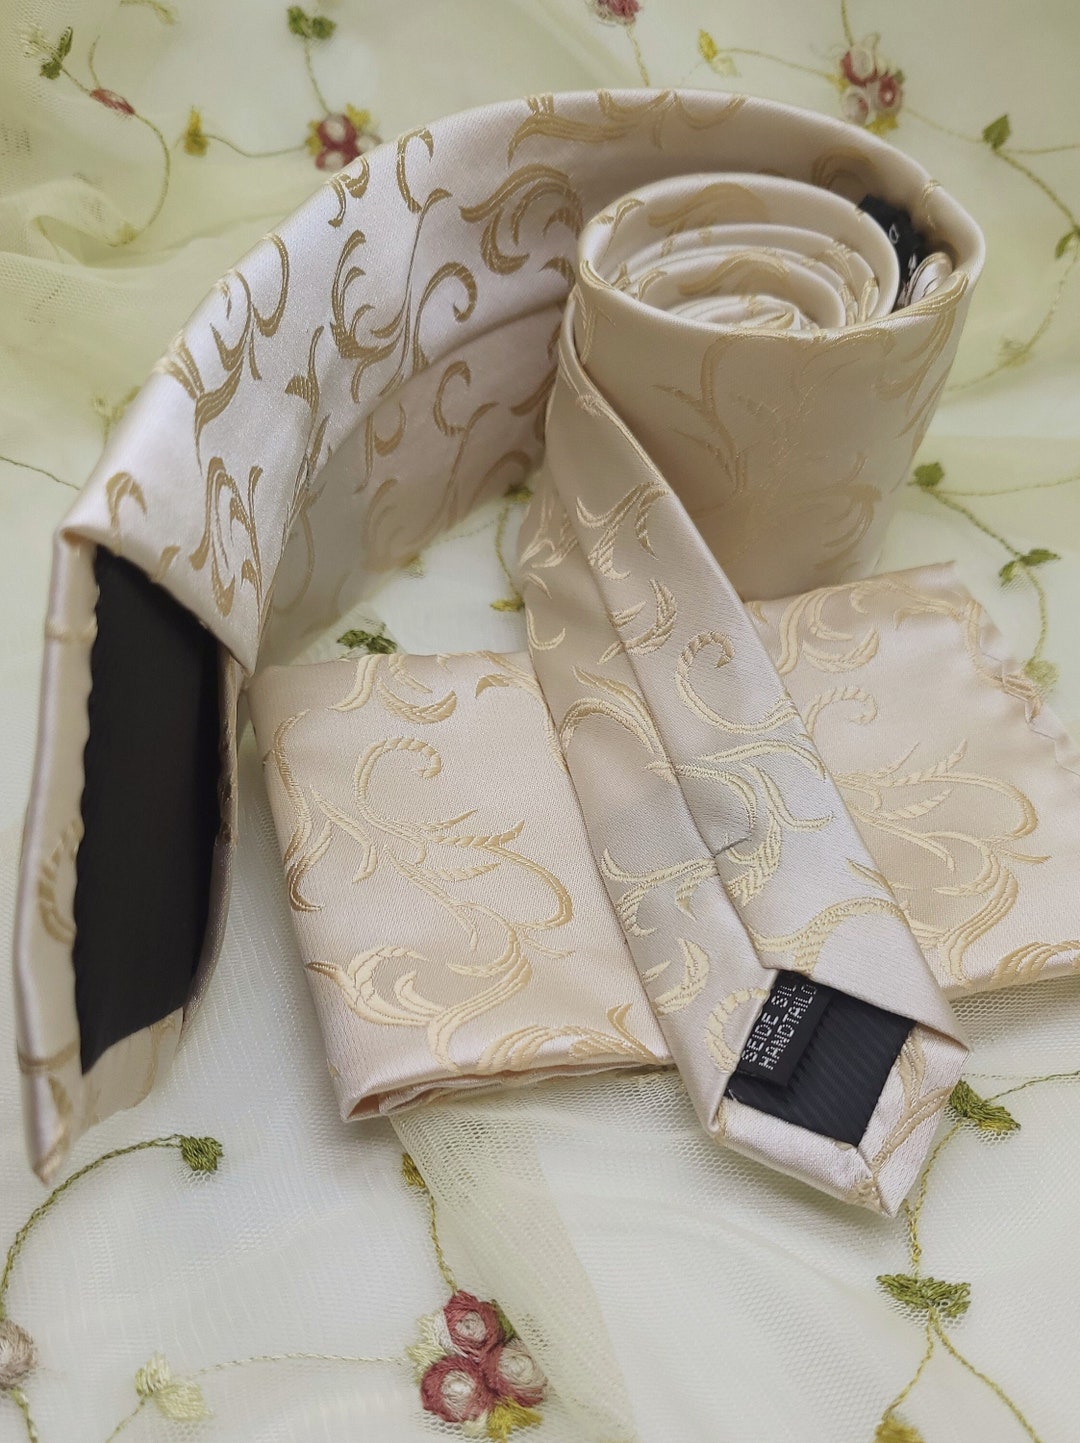 Champagne Gold Vine Tie and Pocket Square Champagne Wedding - Etsy